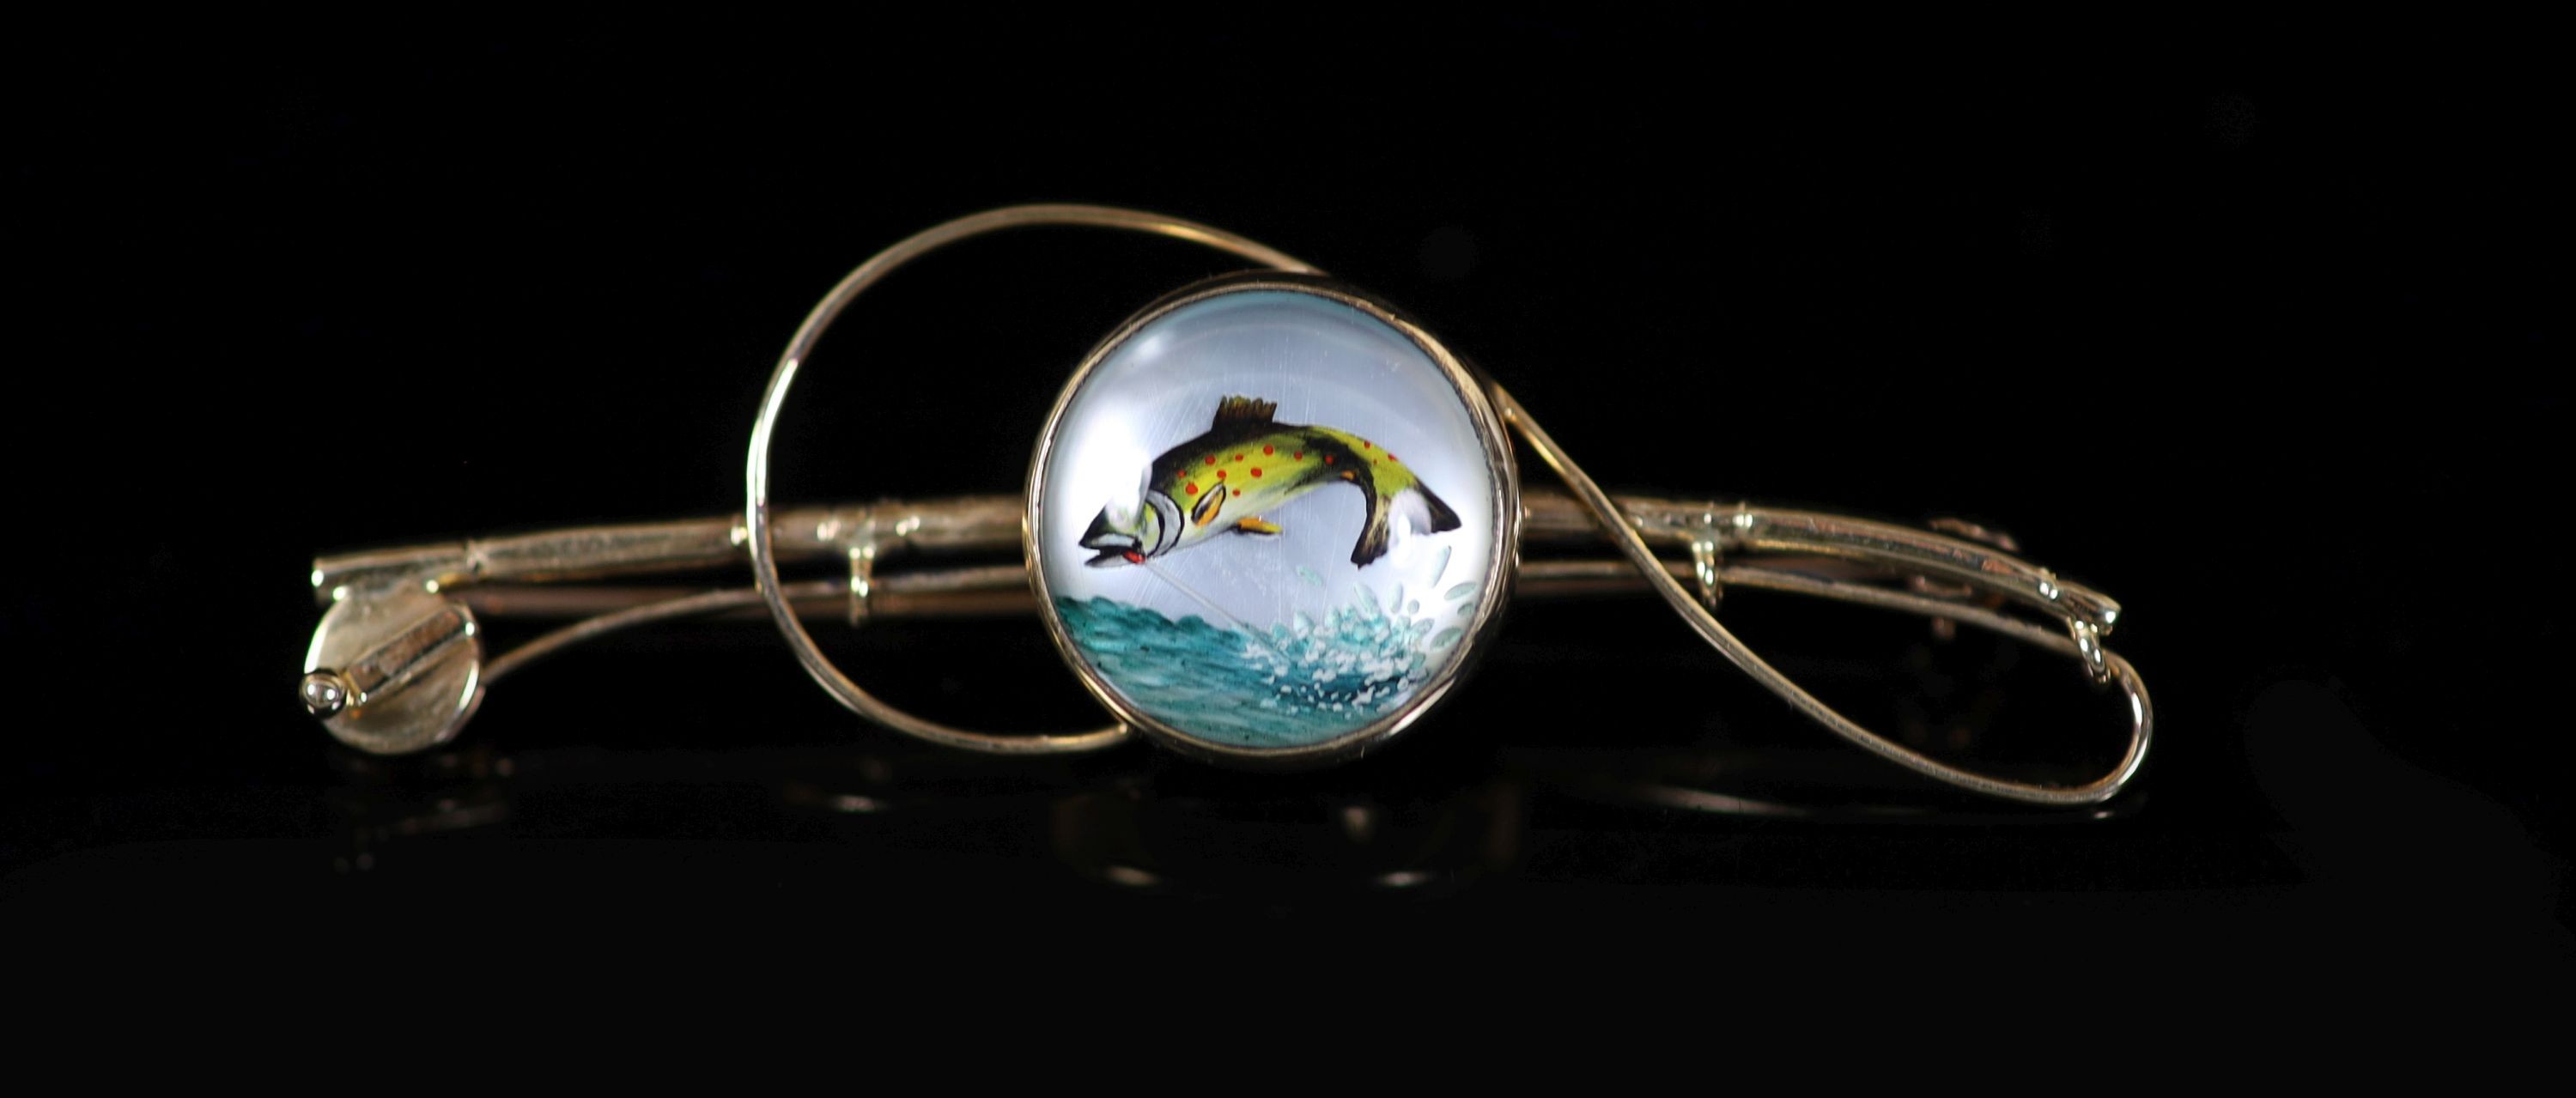 An Edwardian 18ct gold and Essex crystal set bar brooch, modelled as a fly fishing rod, with line and reel